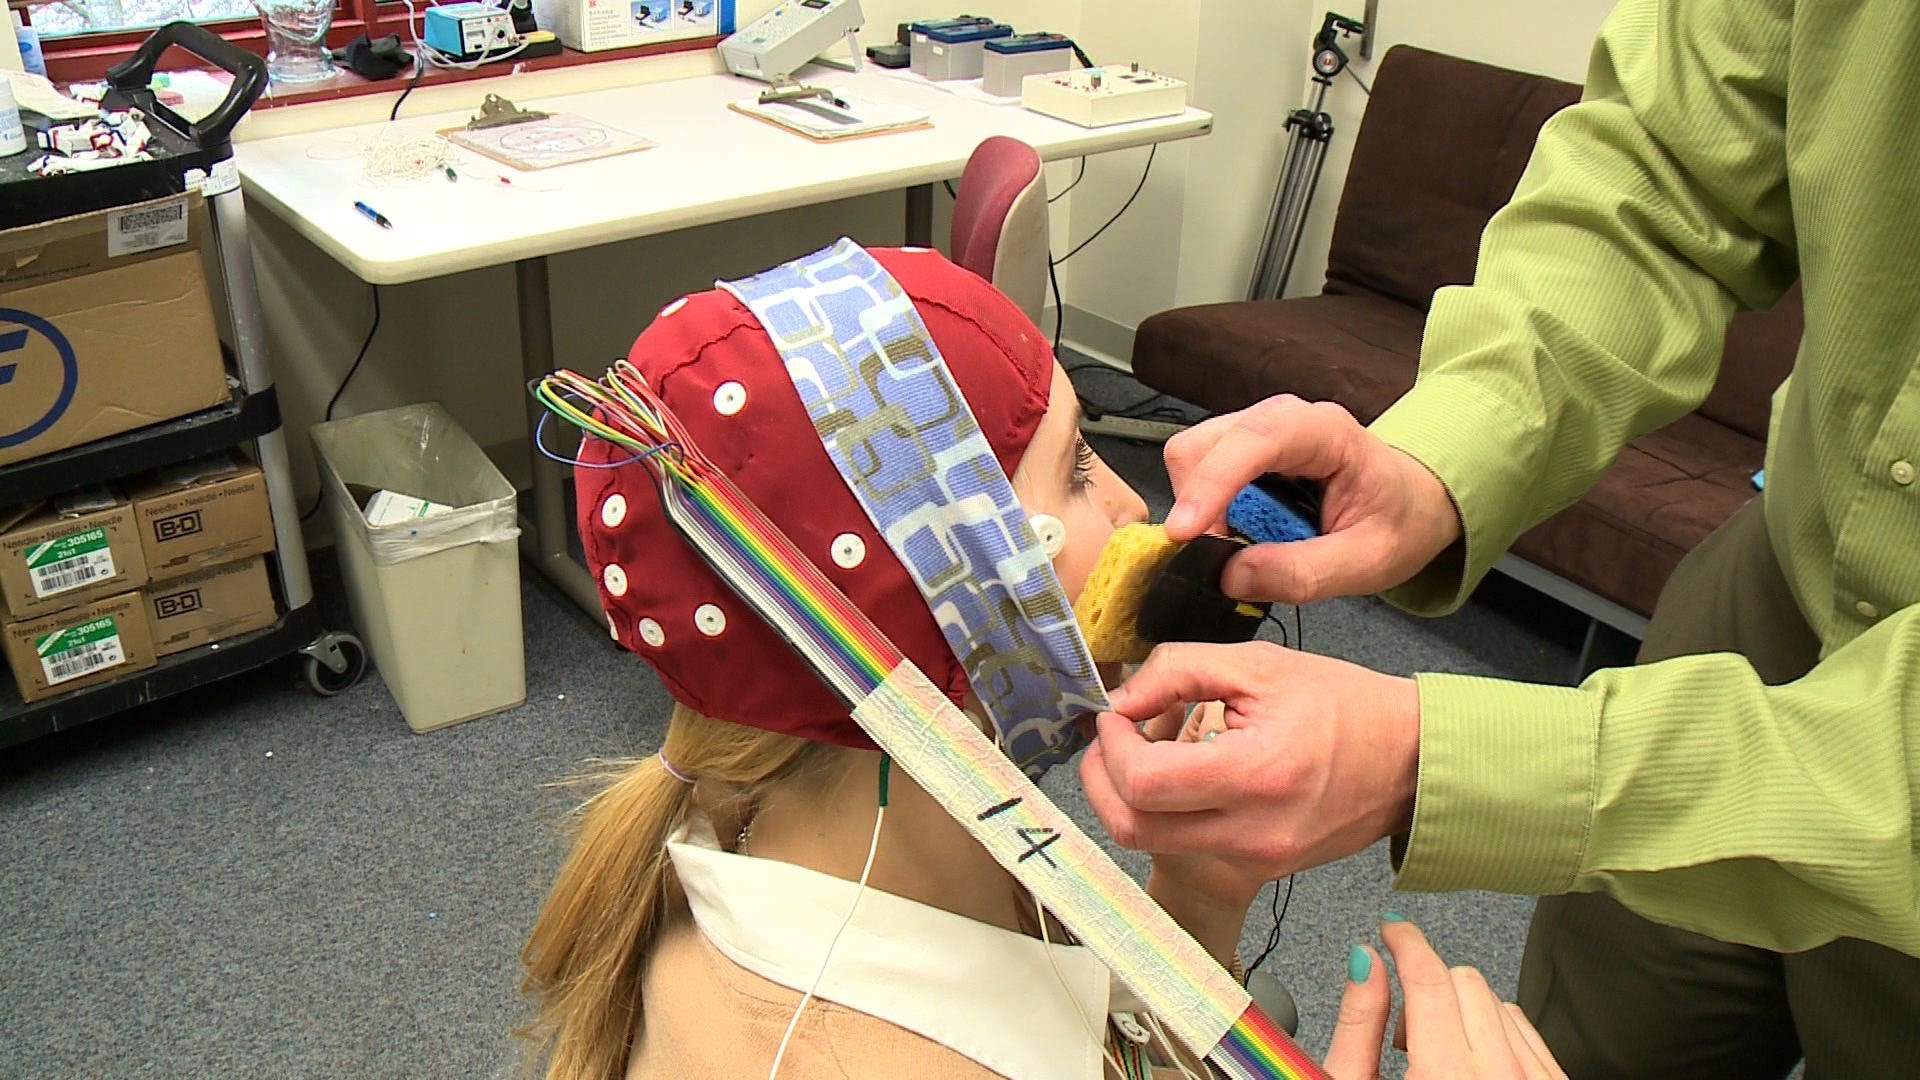 New Electric Thinking Cap Stimulates the Brain’s Learning Capabilities